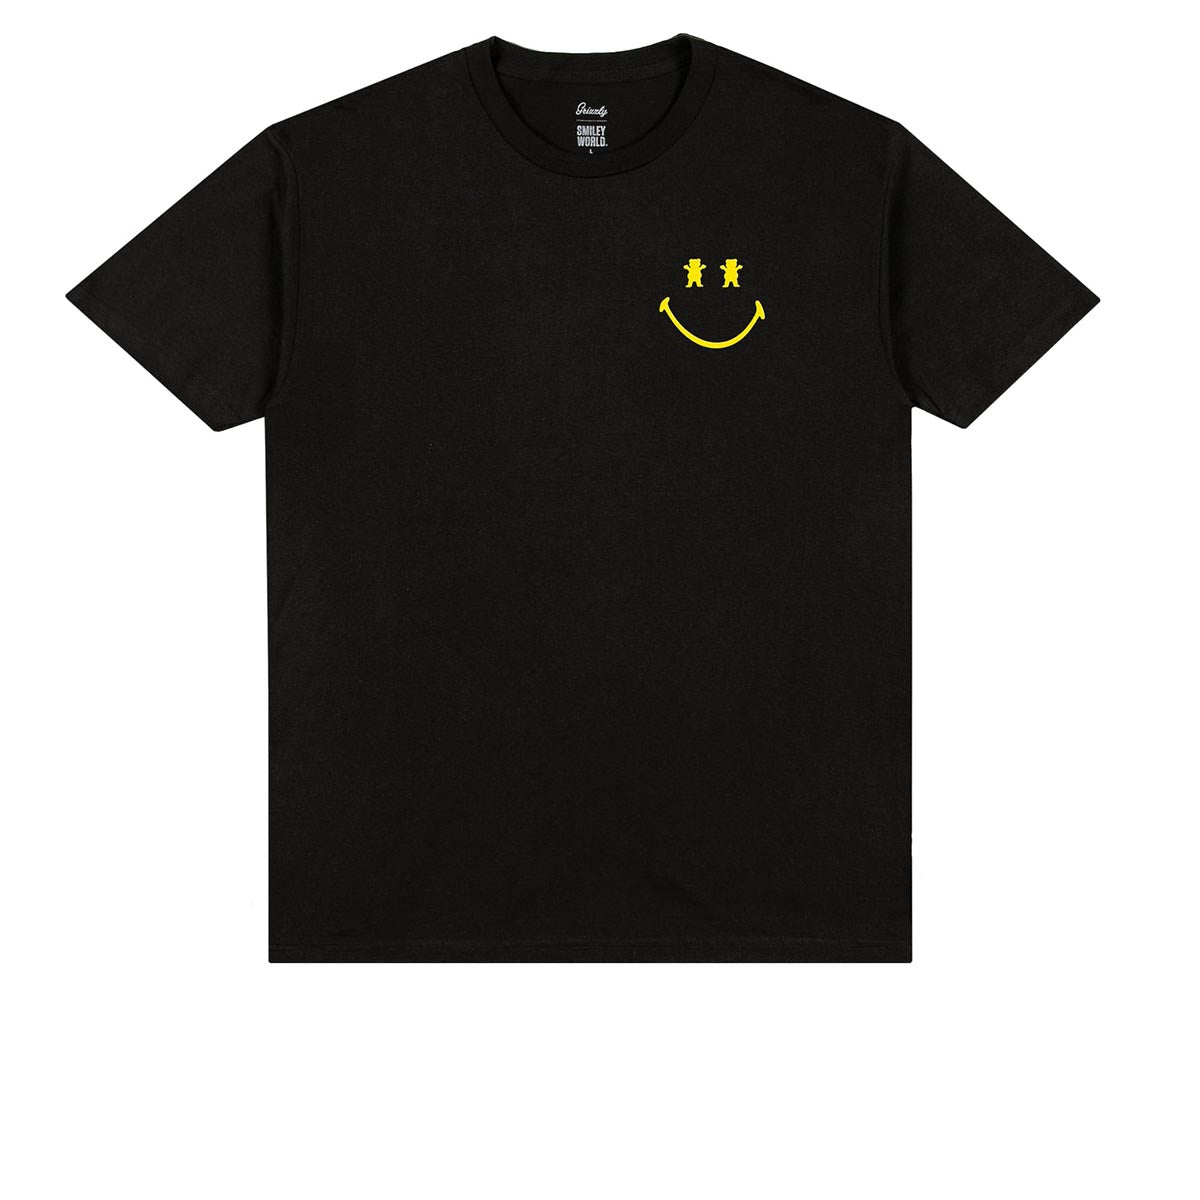 Grizzly x Smiley World Big Smile T-Shirt - Black image 1